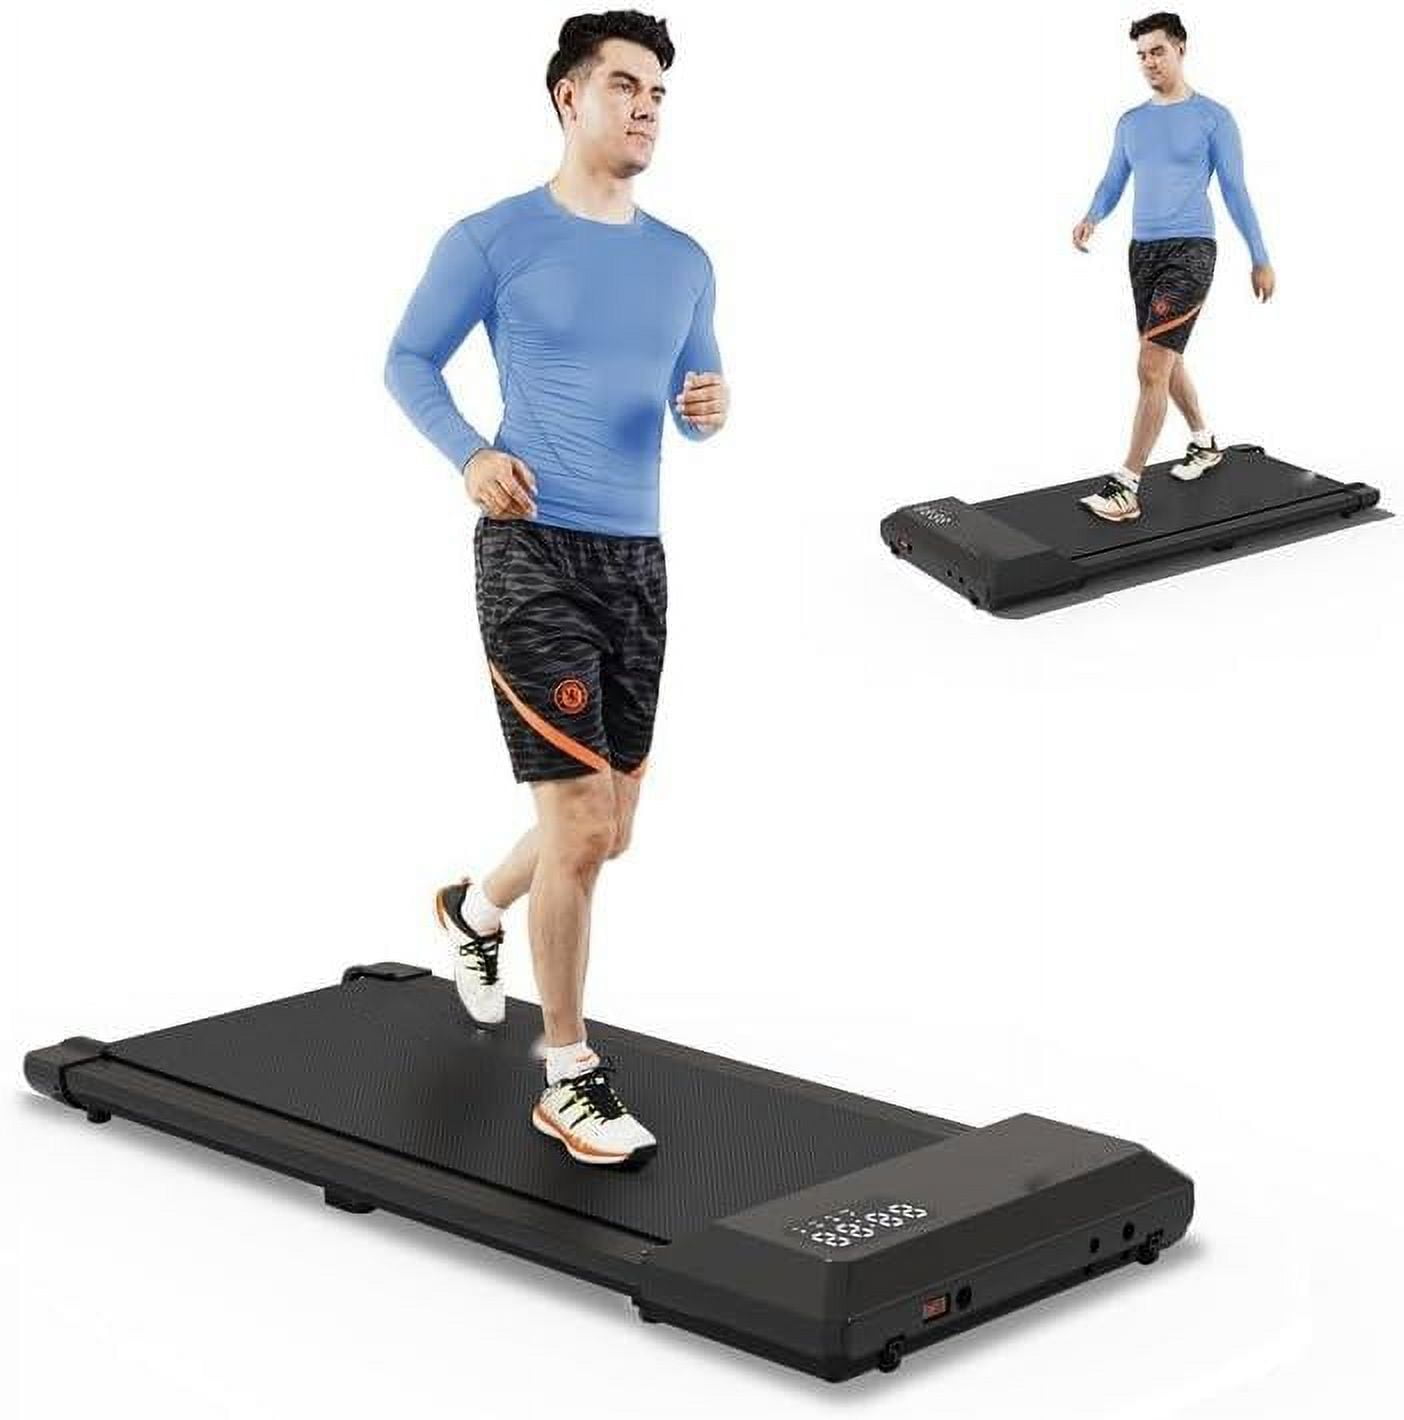 SupeRun Under Desk Treadmill, 35.5*15.5 Walking Area Walking Pad for Home/Office, Portable Walking Treadmill 2.5HP, 2 in 1 Electric Desk Treadmill with Remote Control and LED Display